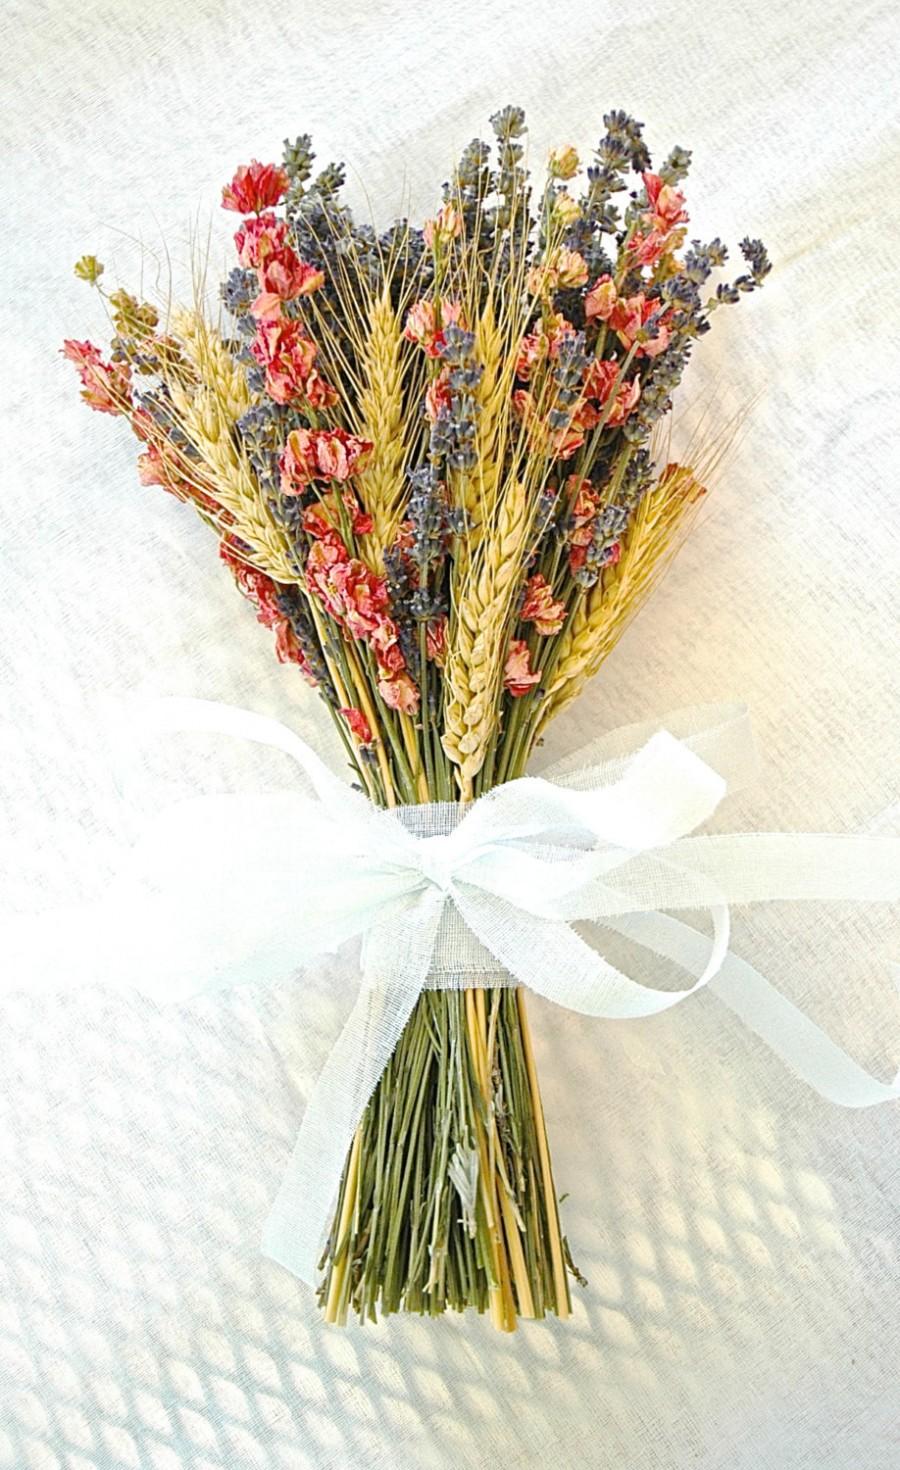 Wedding - Fall Wedding  Bridesmaid Bouquet of Lavender Coral Peach Larkspur and Wheat